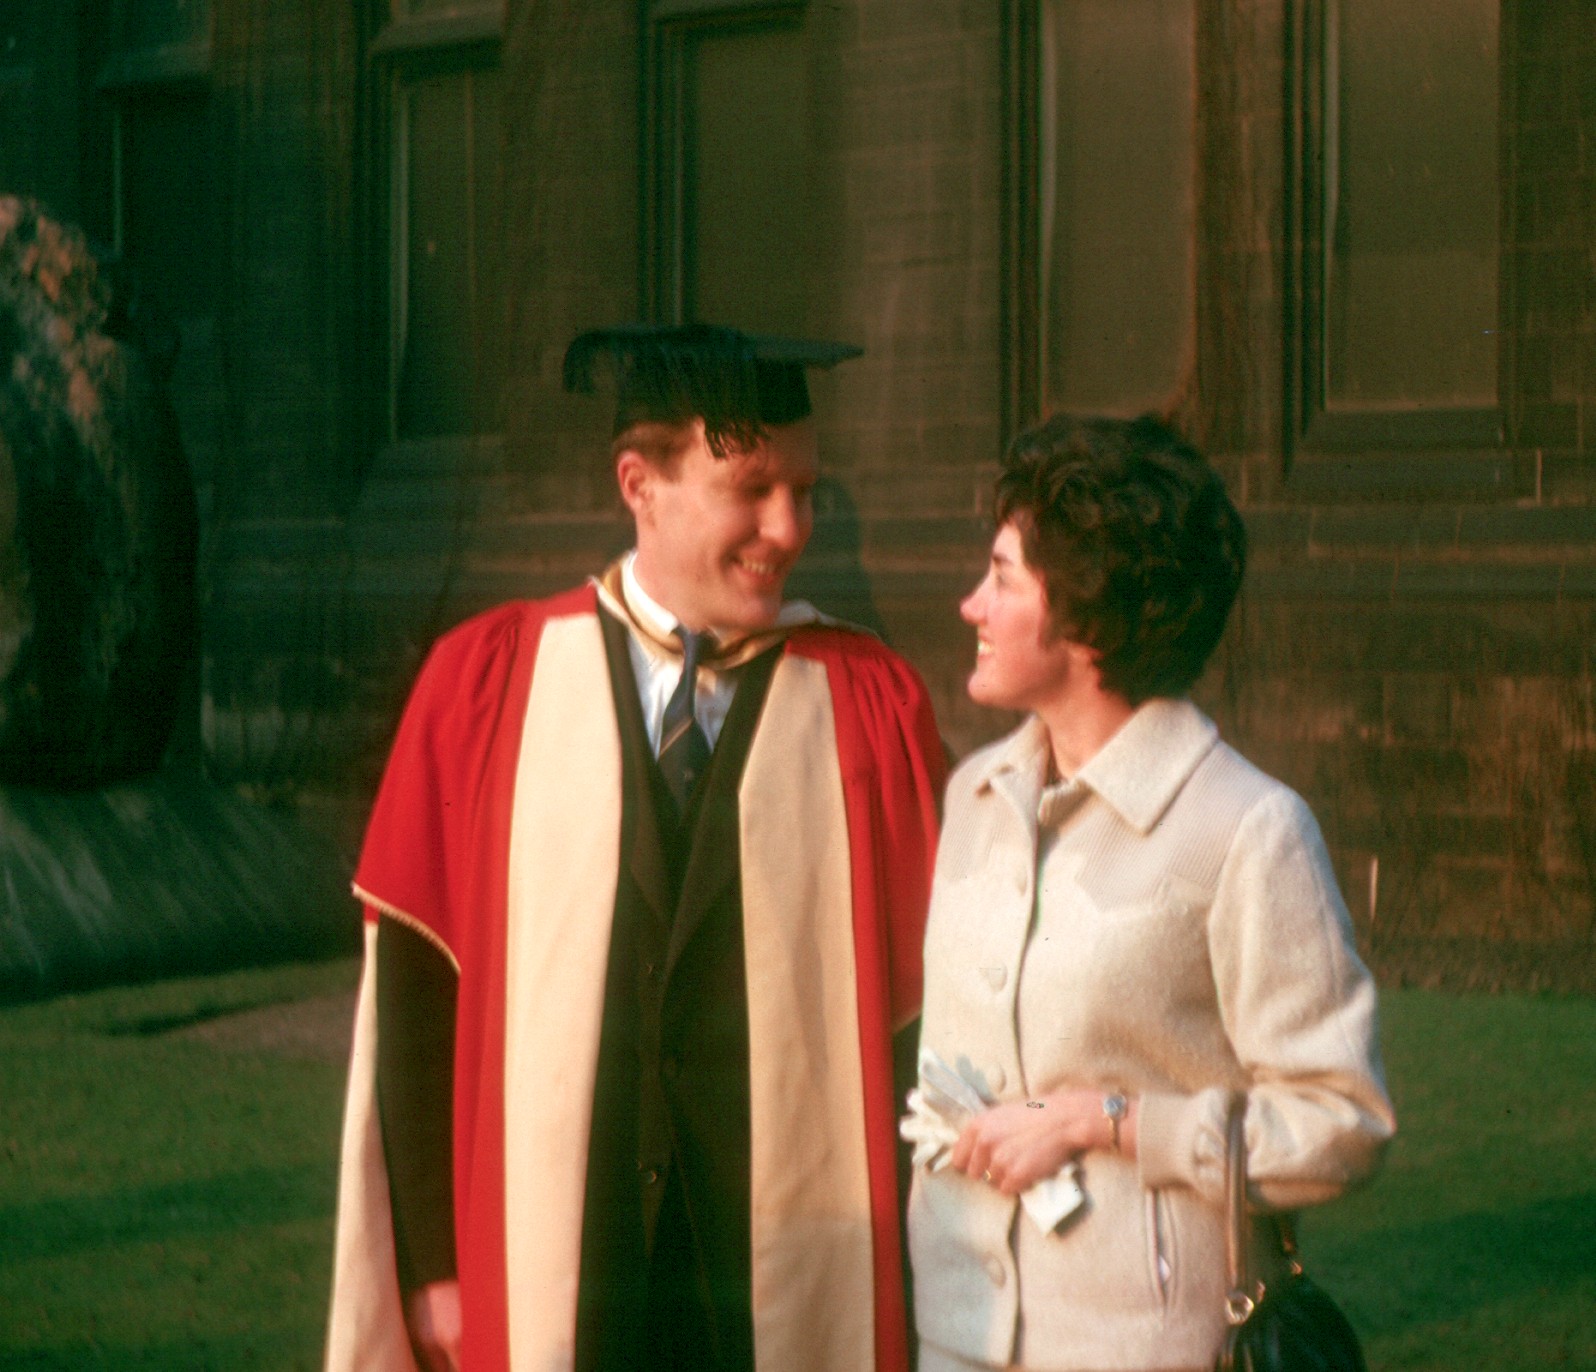 6300734s 13 December 1963 - My second degree day. The people we hired the gown from didn't have the proper cap!